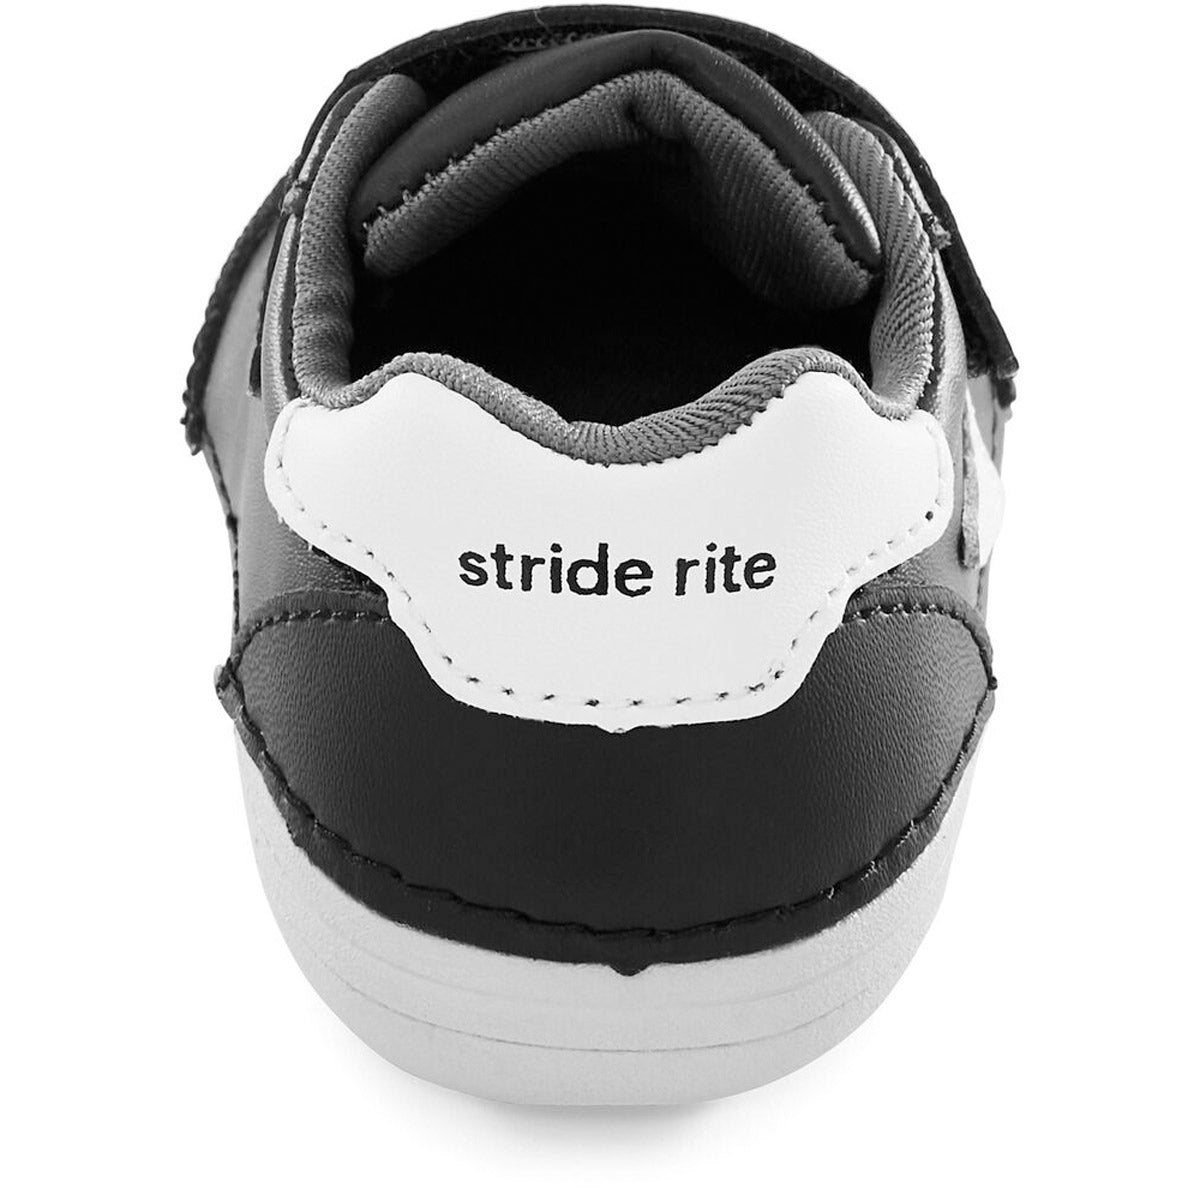 Close-up of the heel of a Stride Rite SM Kennedy Black kids’ athletic shoe.